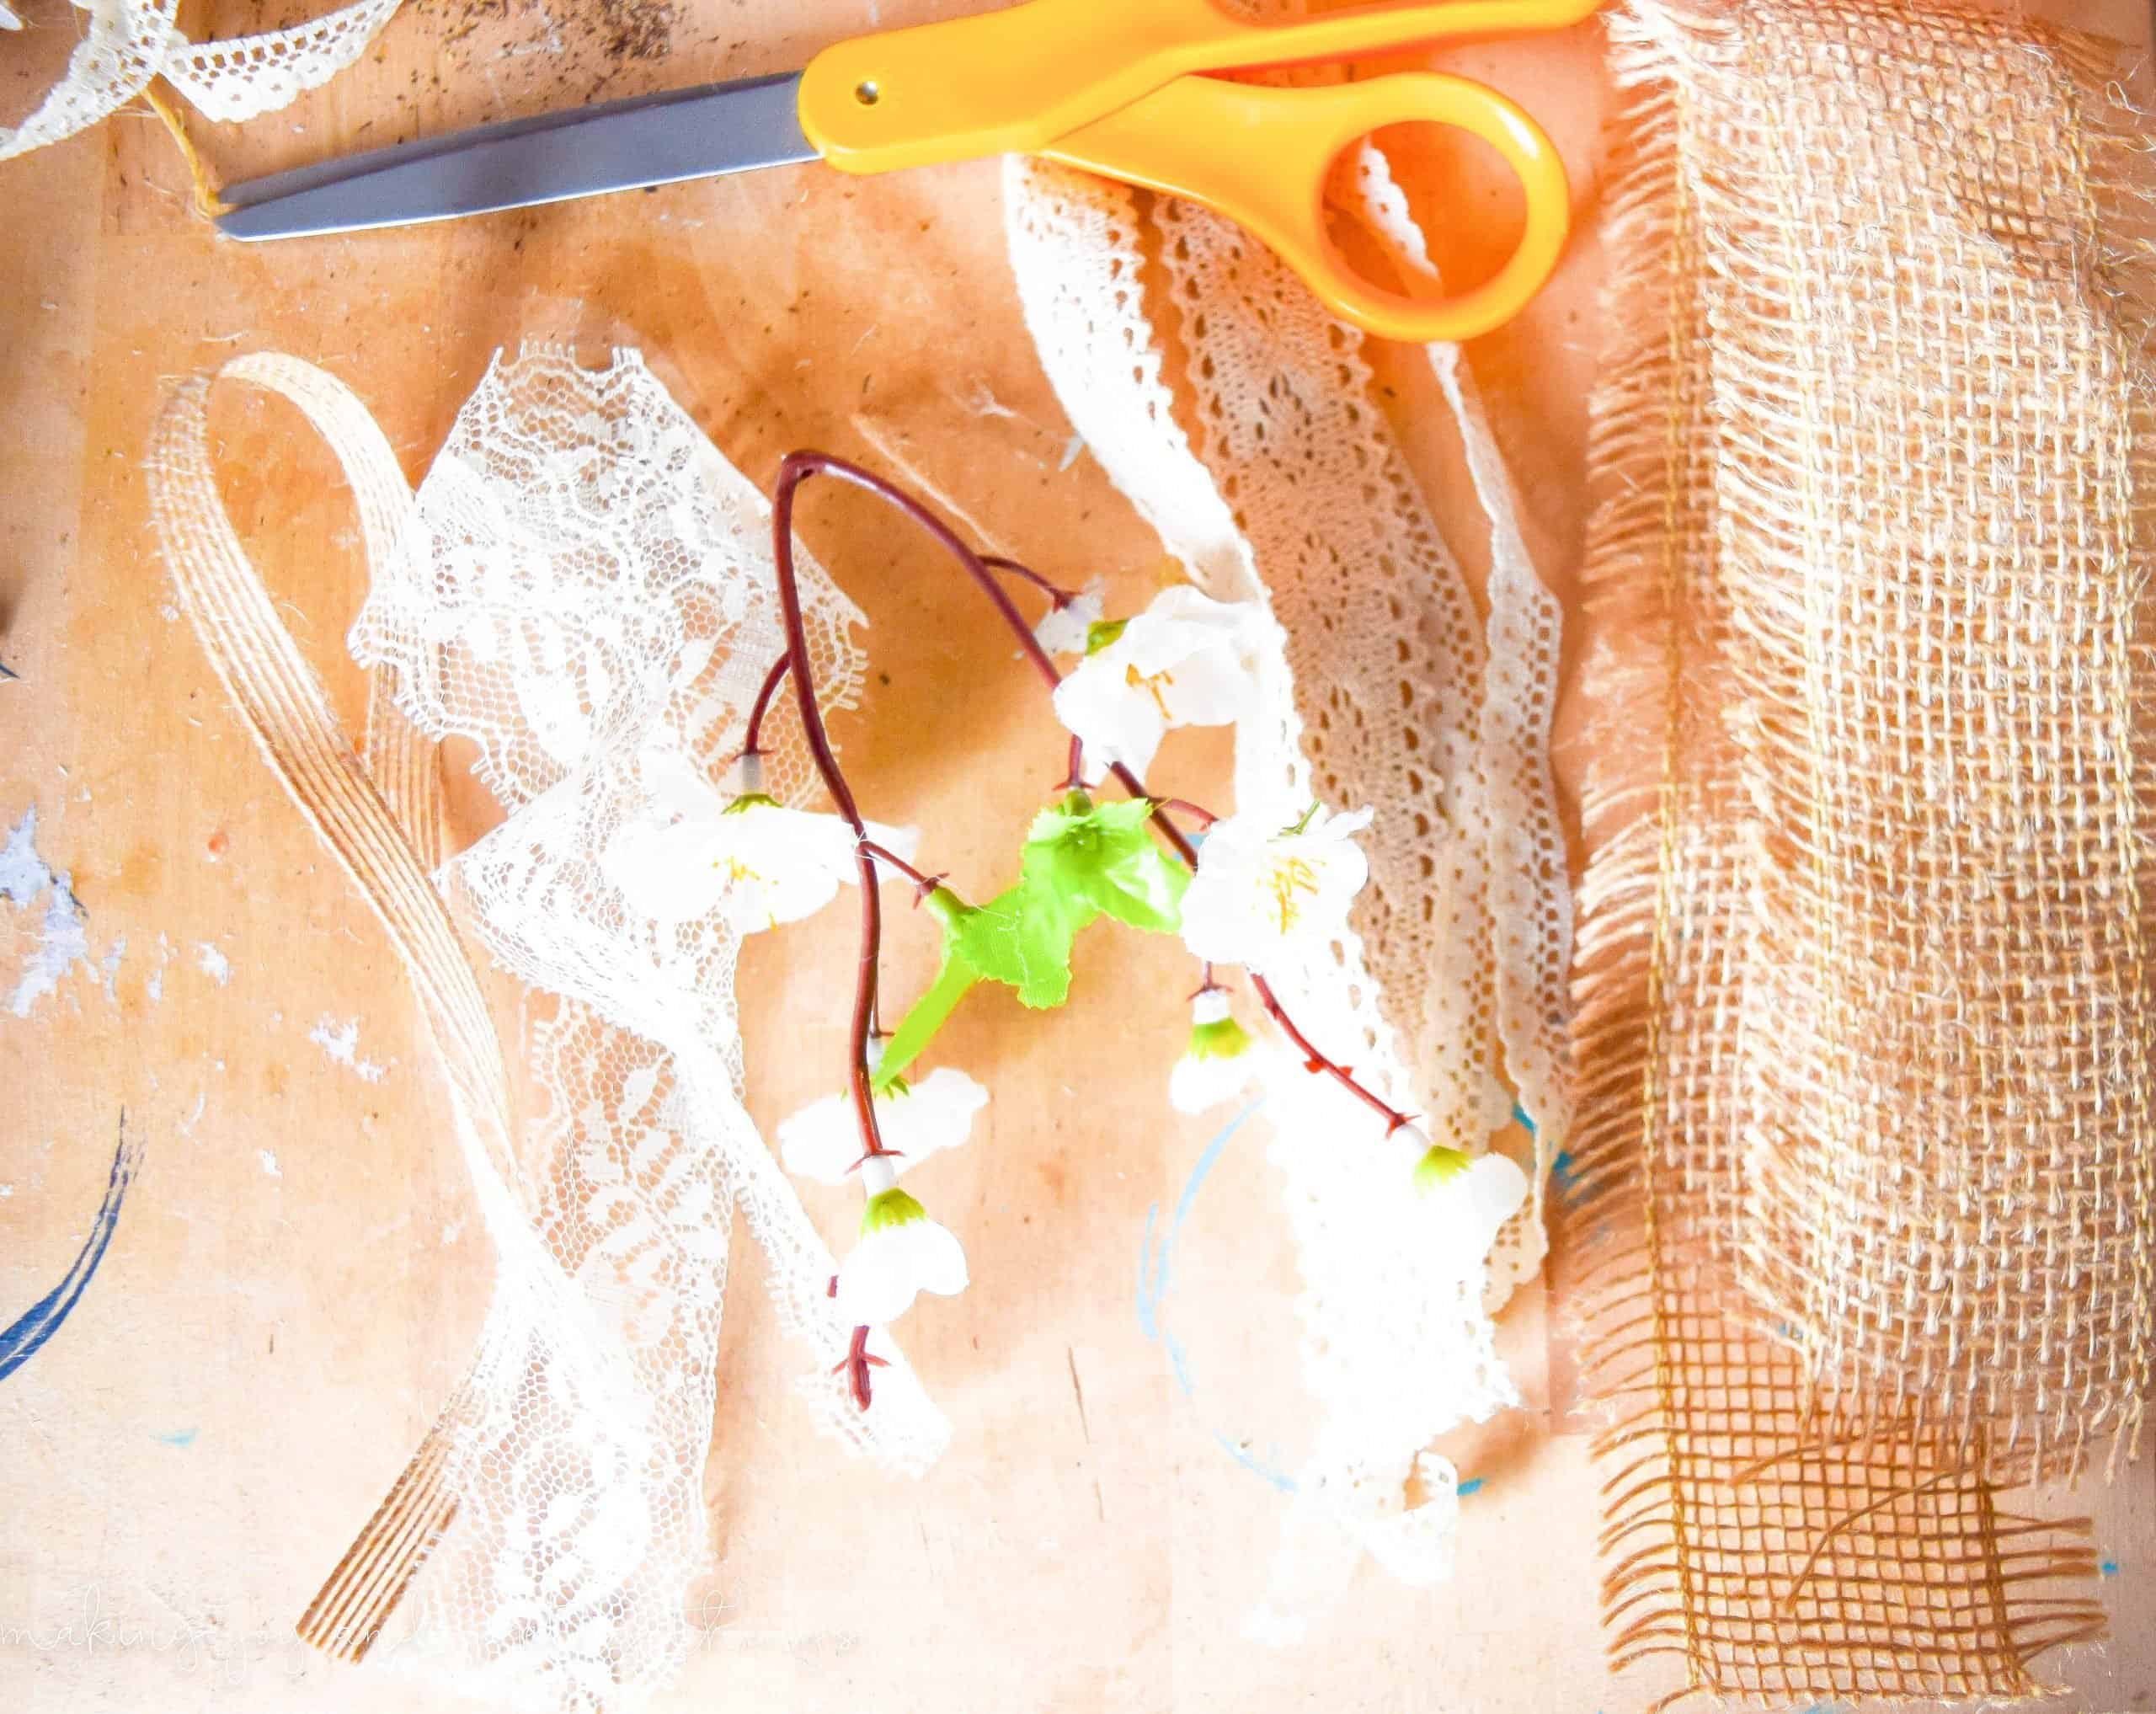 Scissors are a great way to cut down lace and burlap to hang on a sprint mantel garland